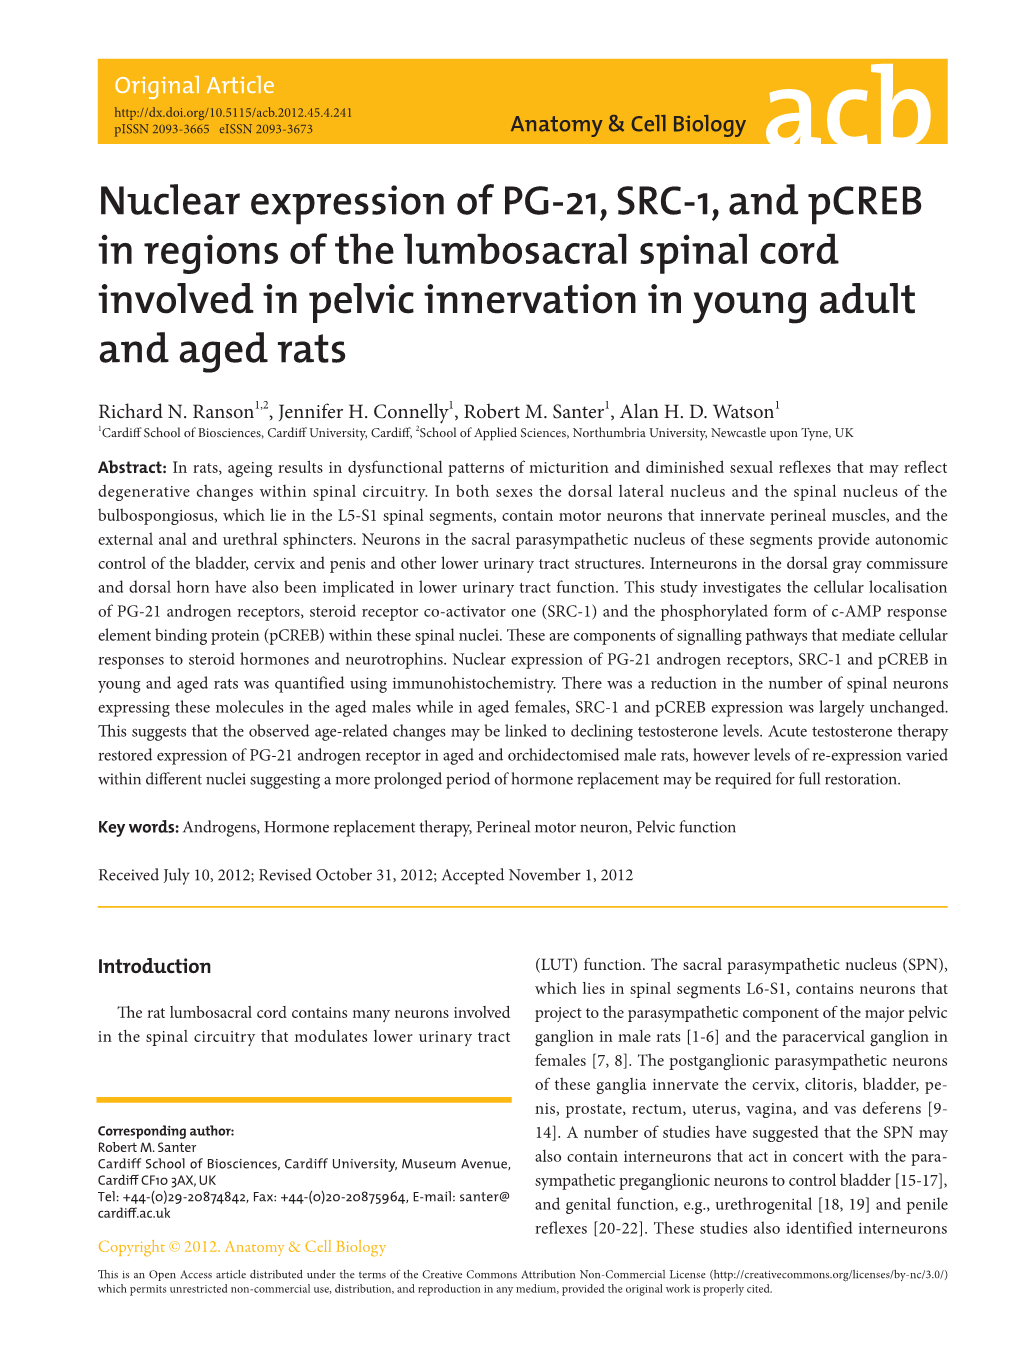 Nuclear Expression of PG-21, SRC-1, and Pcreb in Regions of the Lumbosacral Spinal Cord Involved in Pelvic Innervation in Young Adult and Aged Rats